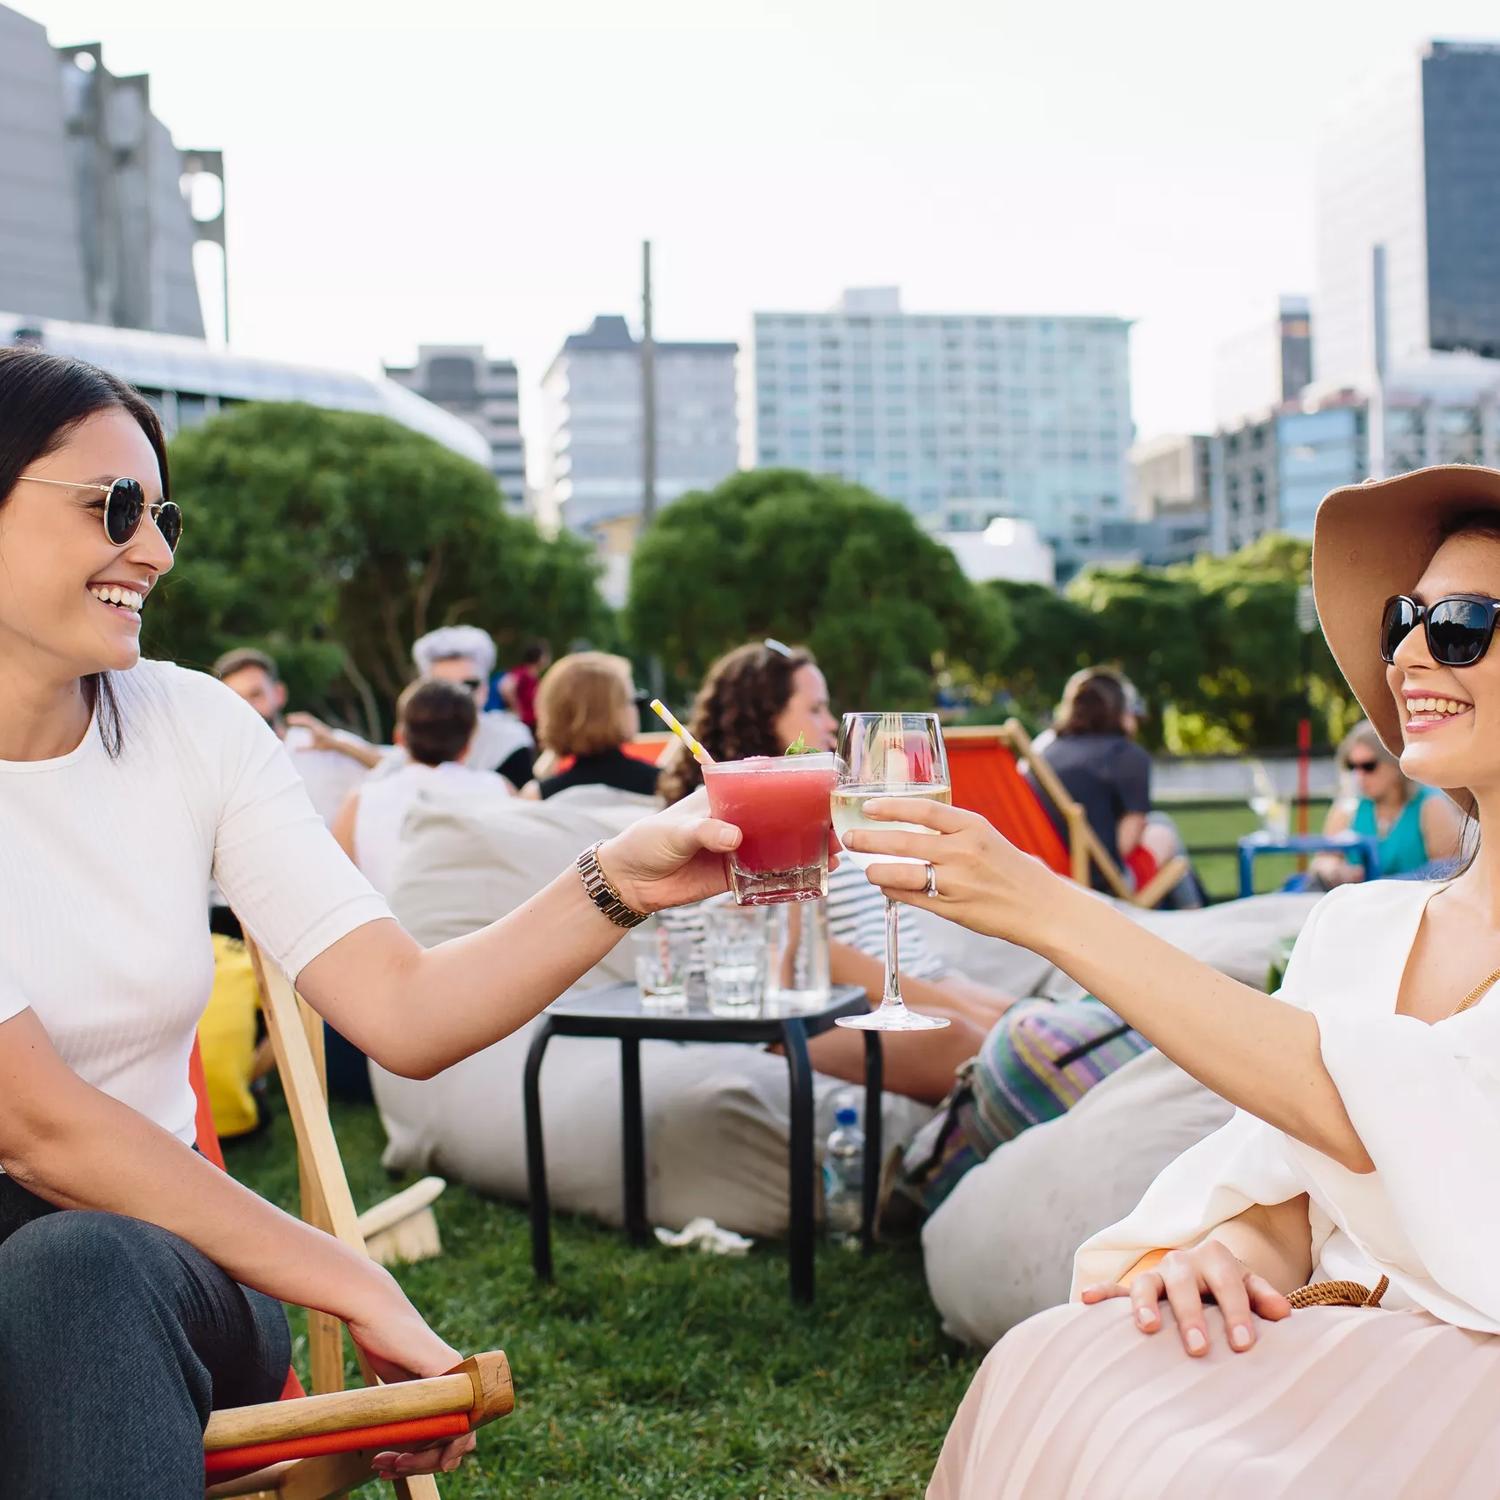 Two women sit on a grassy lawn, clinking glasses on a summers day with other people, trees and buildings in the background.